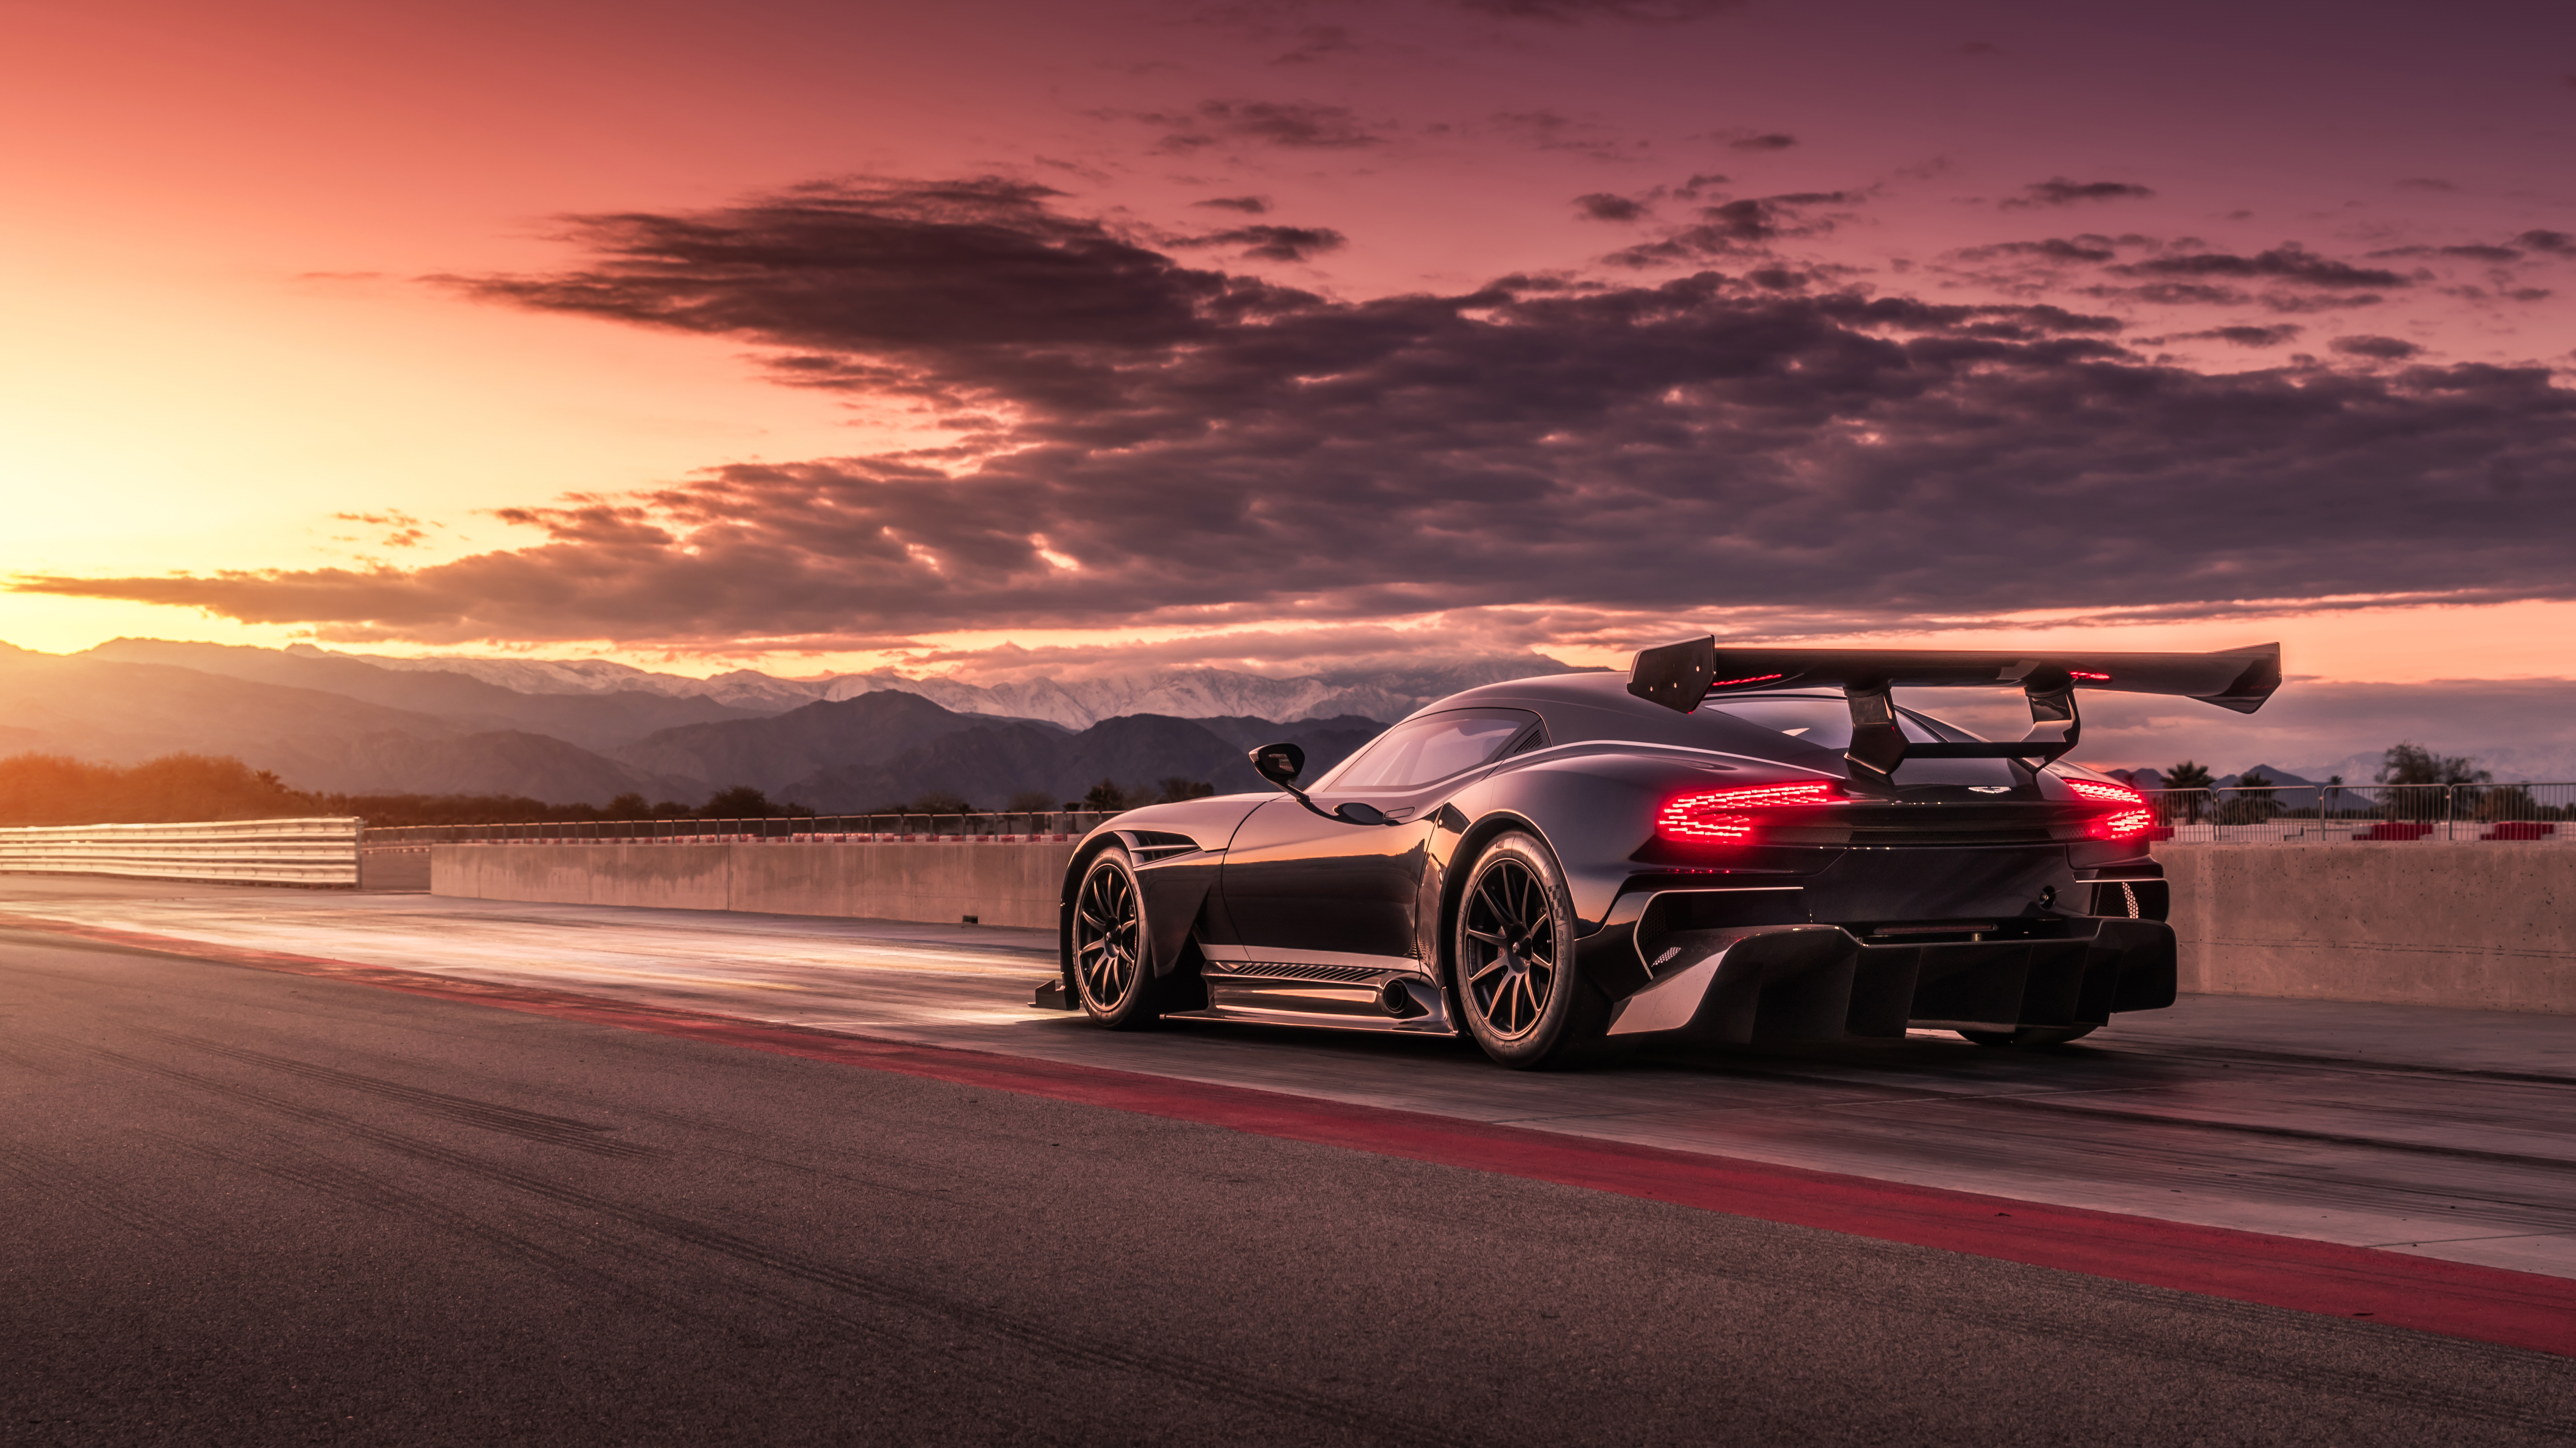 Aston Martin Vulcan 8k, HD Cars, 4k Wallpapers, Images, Backgrounds